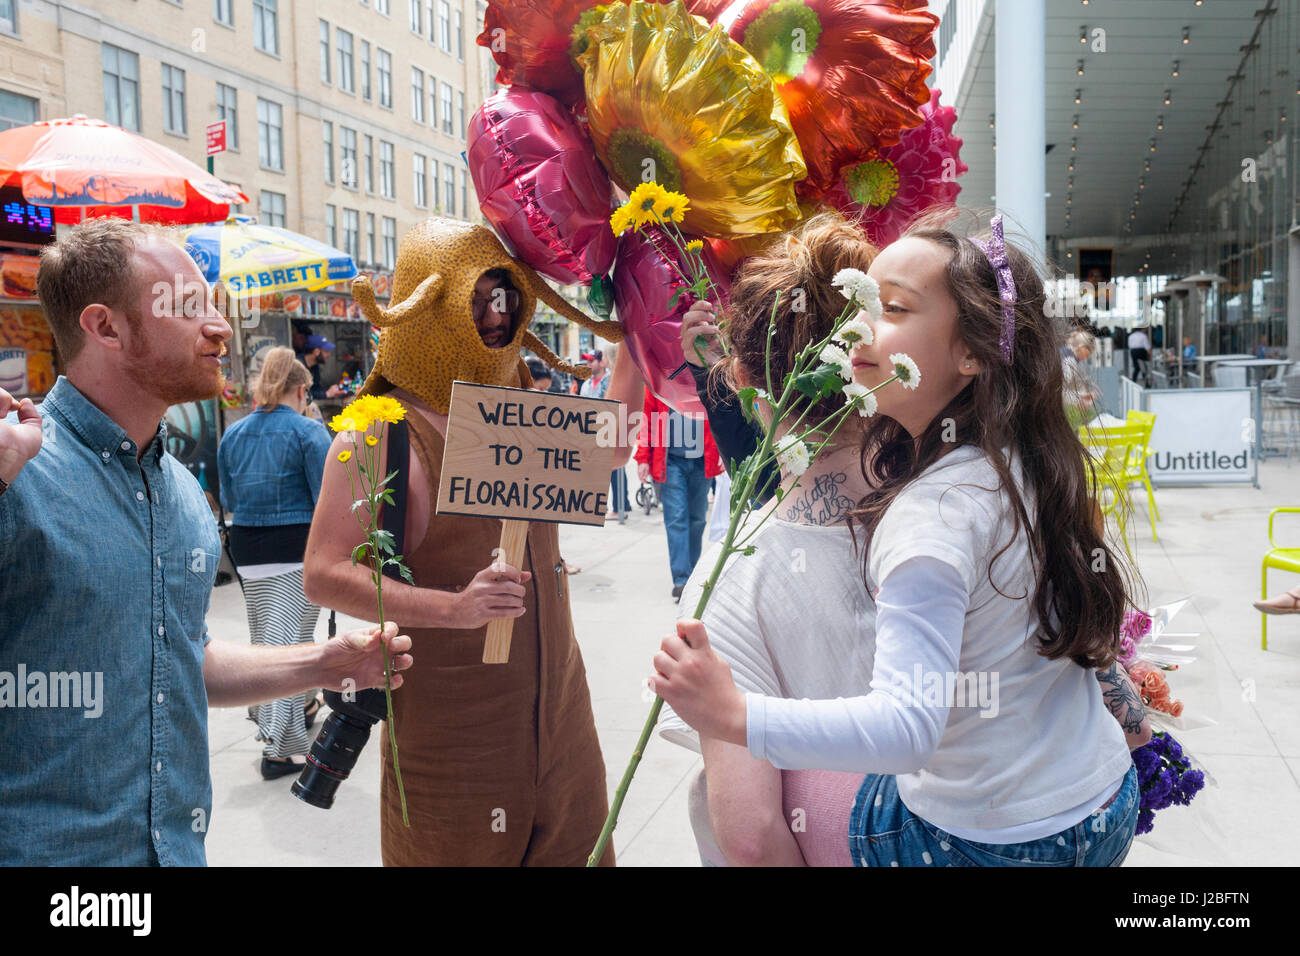 The Brazilian artist, André Feliciano known as the 'art gardener' prior to his procession on the High Line Park in New York on Sunday, April 23, 2017 distributes flowers to passer-by in his performance art piece, the Floraissance parade. The Floraissance is an art movement created by Feliciano based on the idea that contemporary cannot describe art anymore and we art moving into the next phase, growing like flowers, into the Floraissance. (© Richard B. Levine) Stock Photo